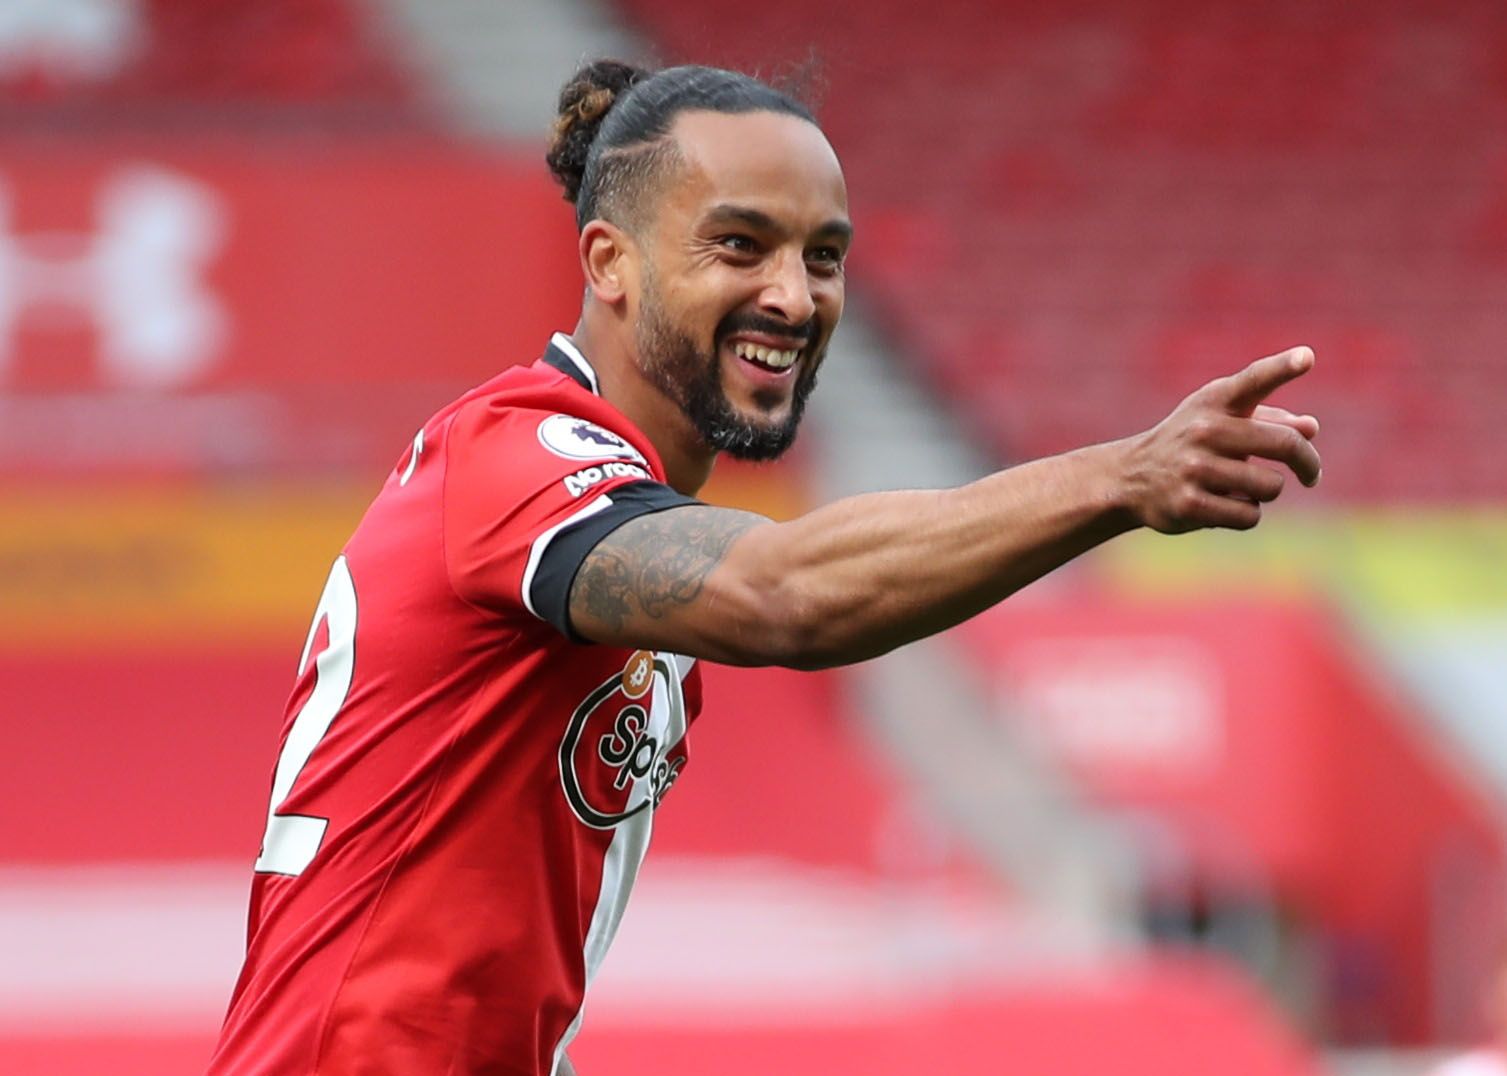 Soccer Football - Premier League - Southampton v Fulham - St Mary's Stadium, Southampton, Britain - May 15, 2021 Southampton's Theo Walcott celebrates scoring their third goal Pool via REUTERS/Peter Cziborra EDITORIAL USE ONLY. No use with unauthorized audio, video, data, fixture lists, club/league logos or 'live' services. Online in-match use limited to 75 images, no video emulation. No use in betting, games or single club /league/player publications.  Please contact your account representative